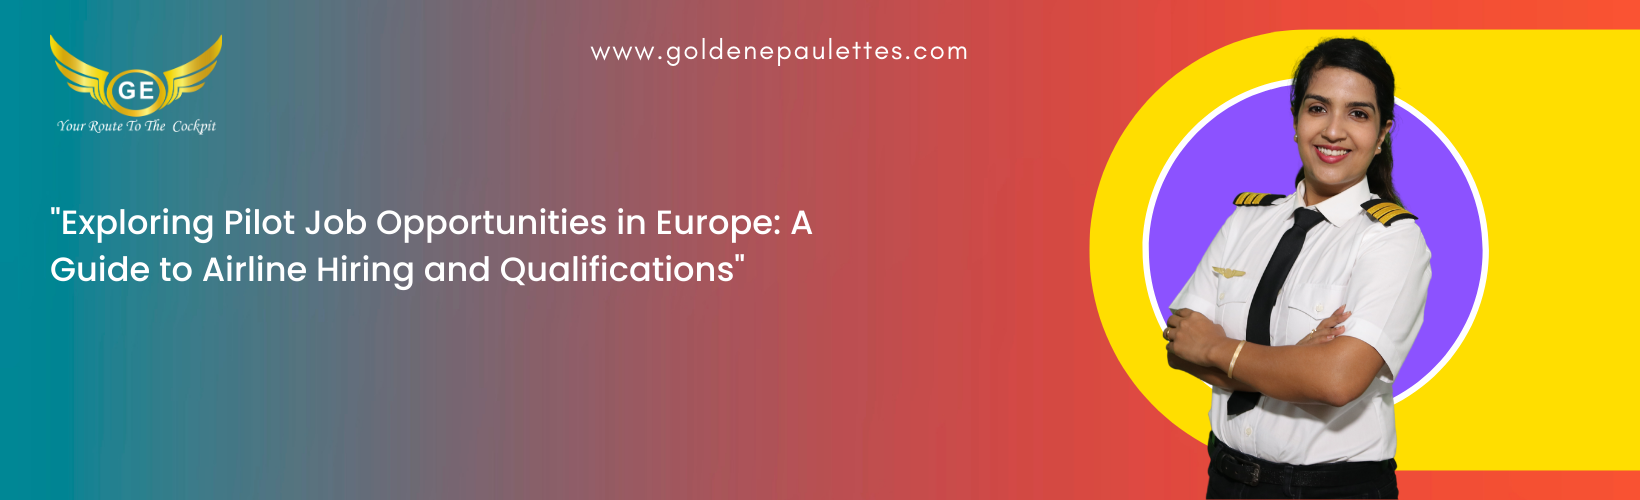 The Different Airlines Hiring Pilot in Europe – A look at the different airlines in Europe that are currently hiring pilots and the qualifications required to apply. (Reference